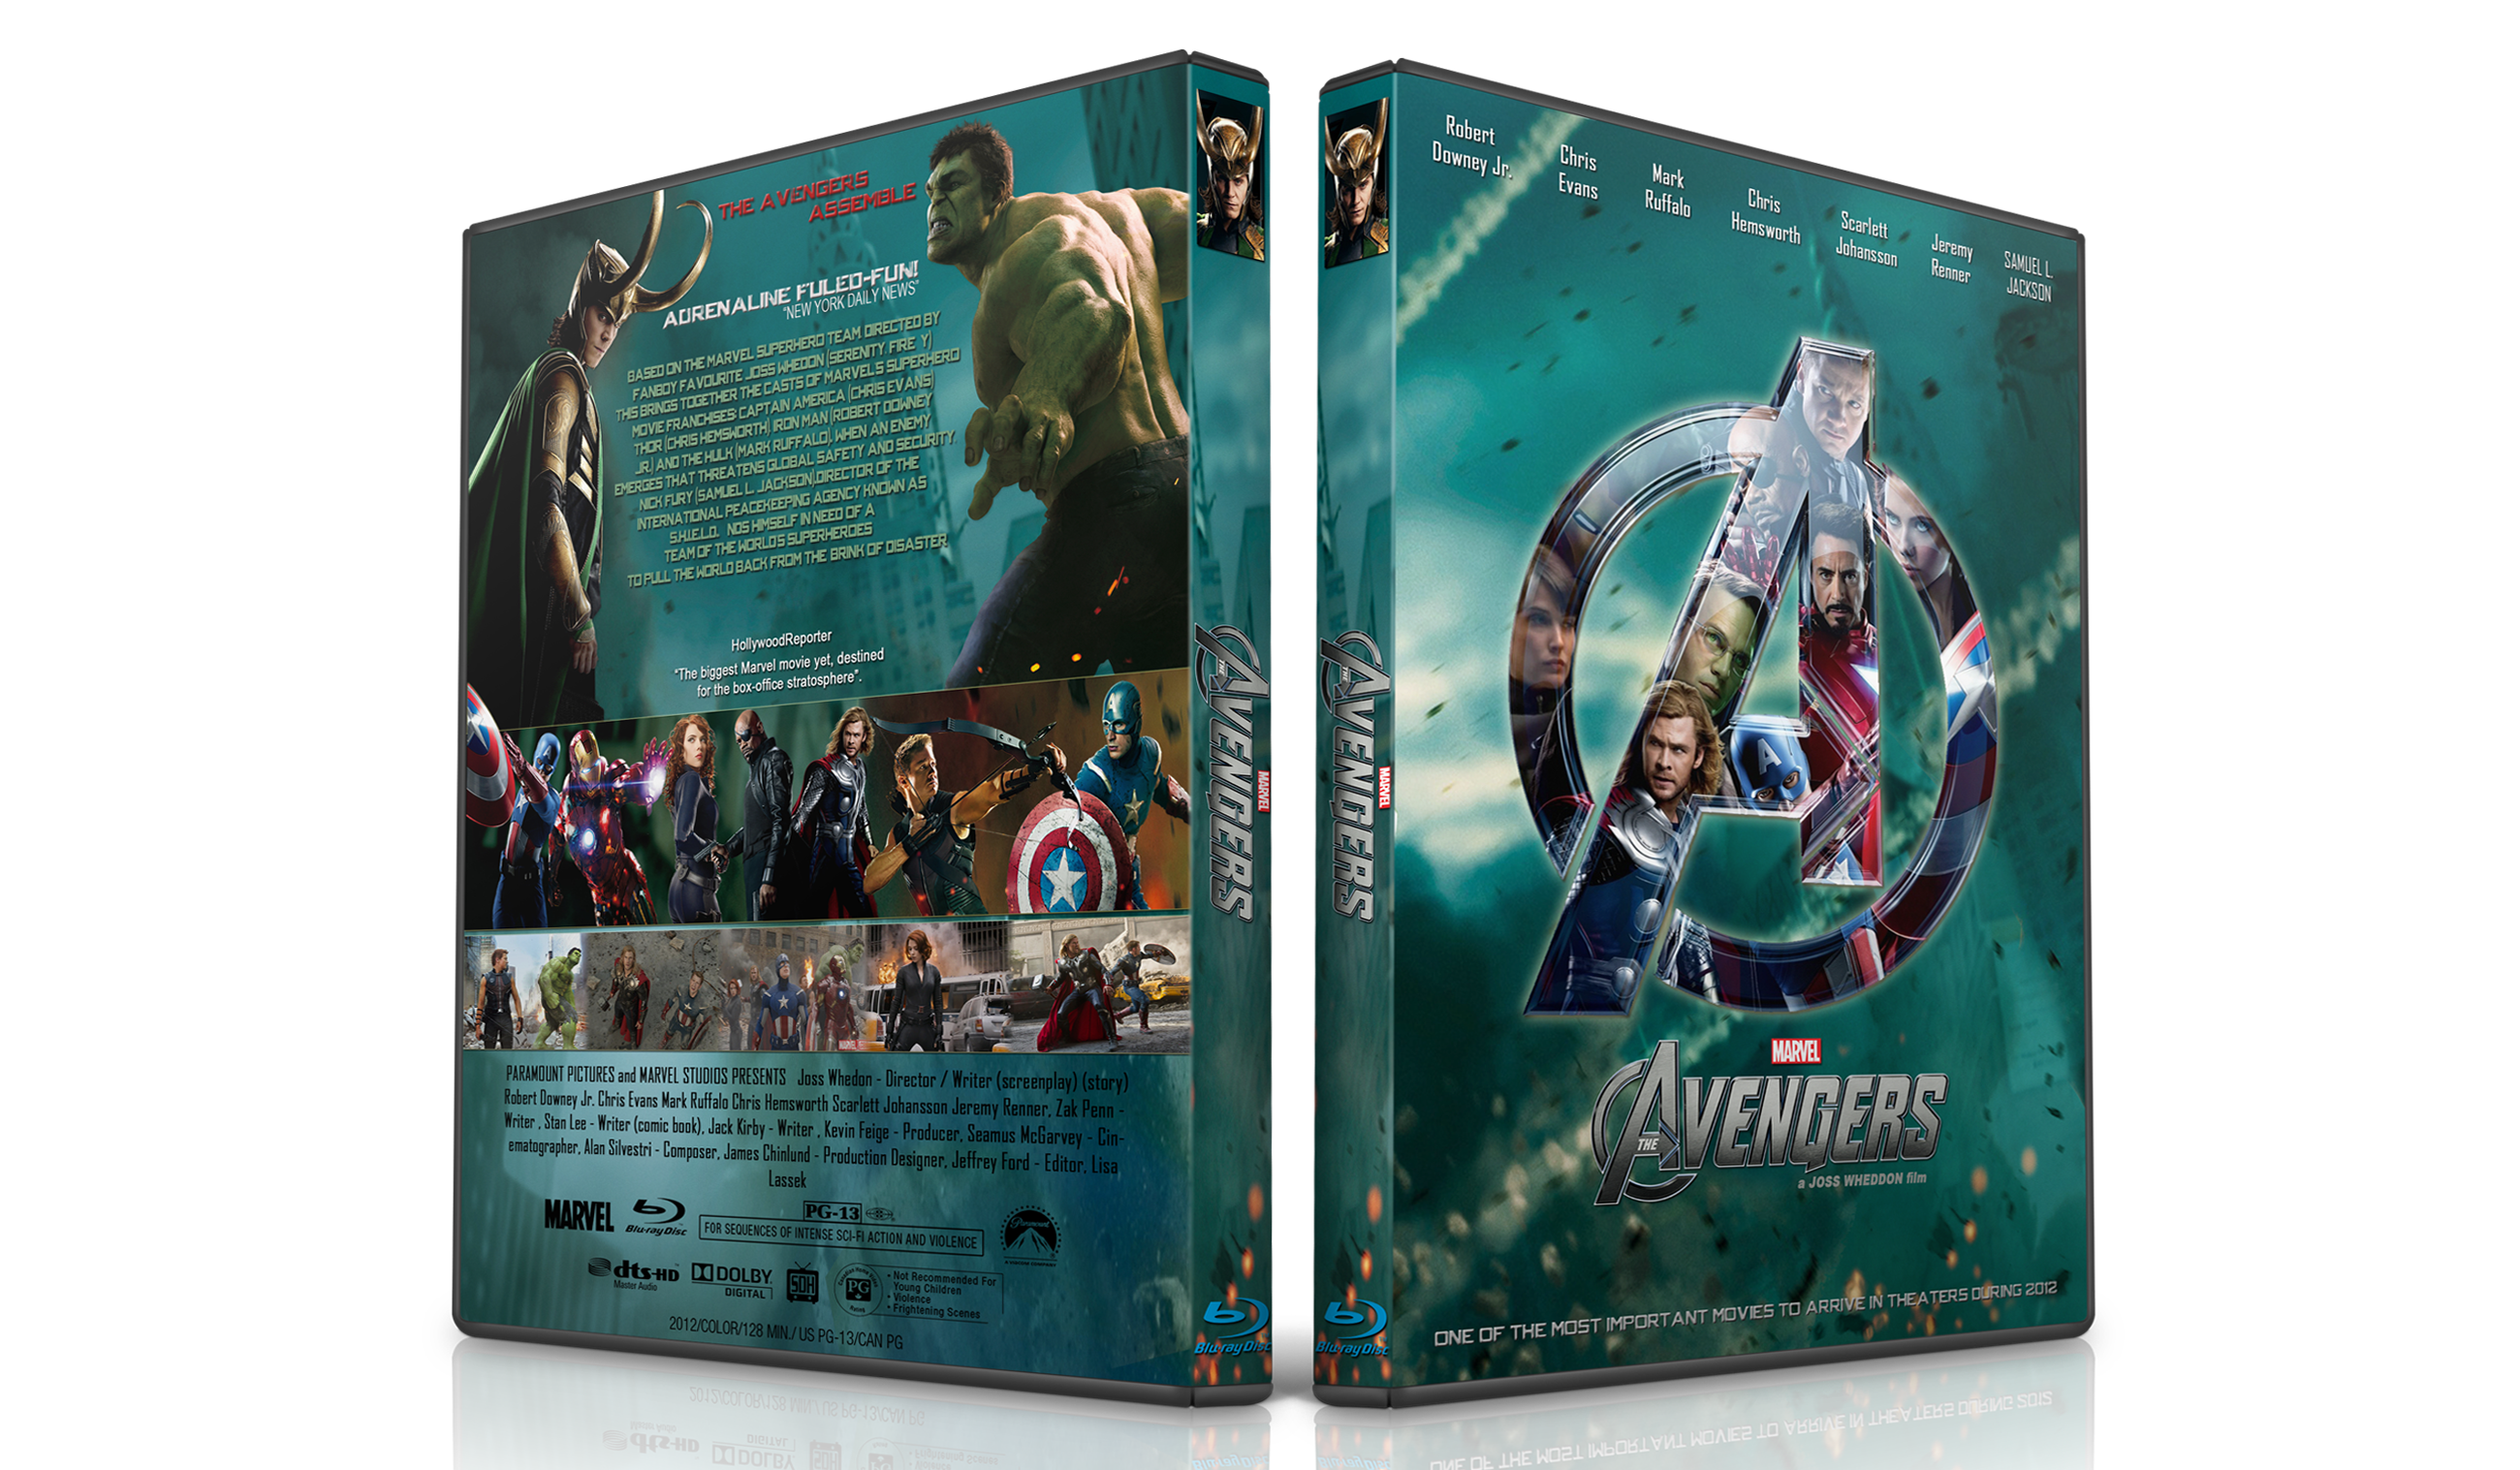 The Avengers box cover